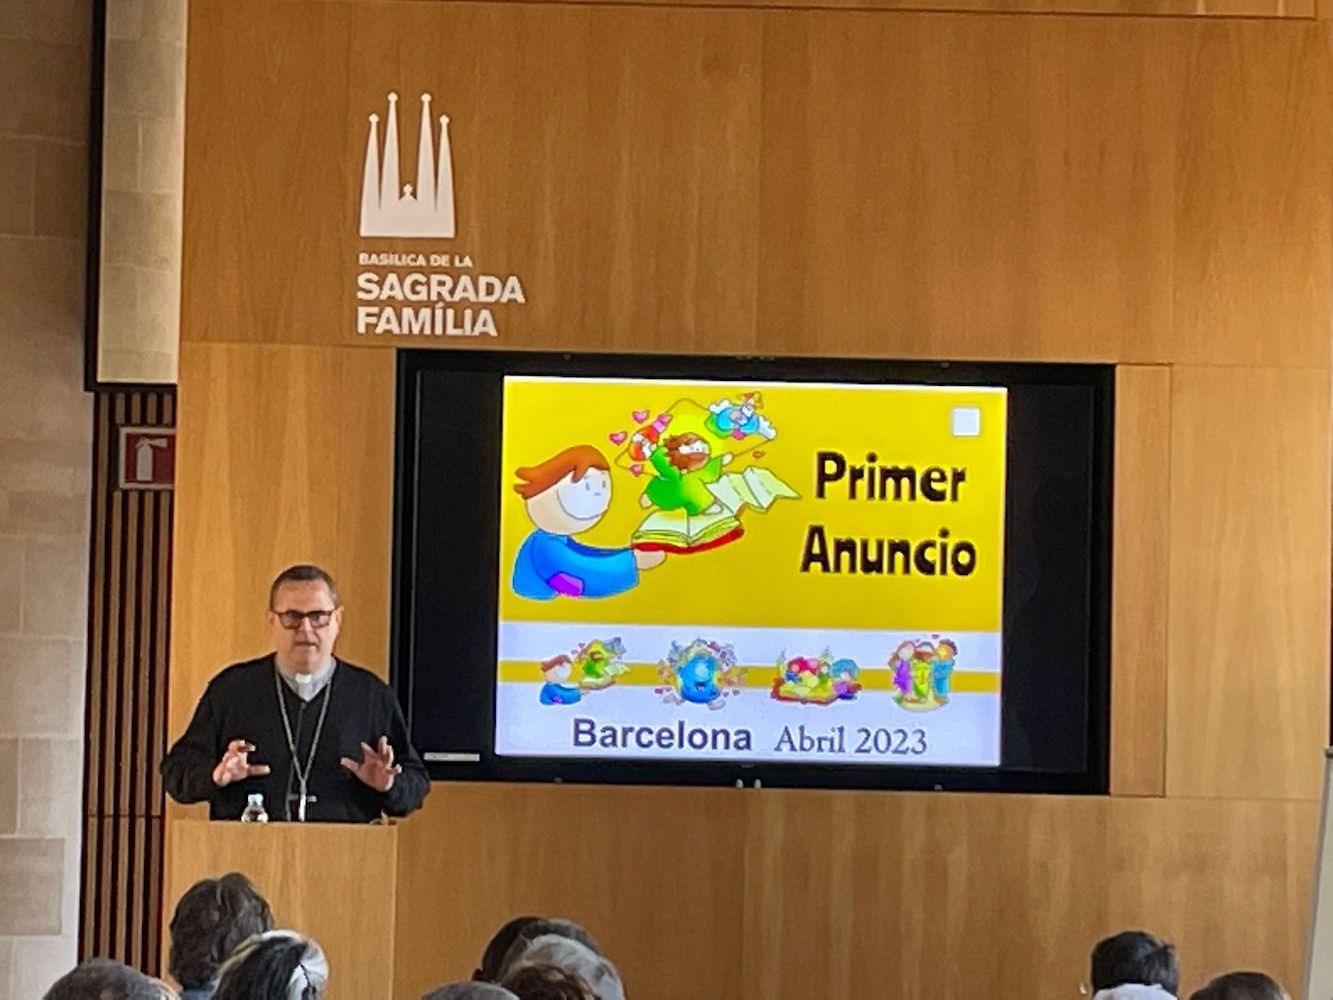 Sagrada Família hosts Conference of the Lay Apostolate of Catalonia, presided by Mons. Sergi Gordo, Auxiliary Bishop of Barcelona